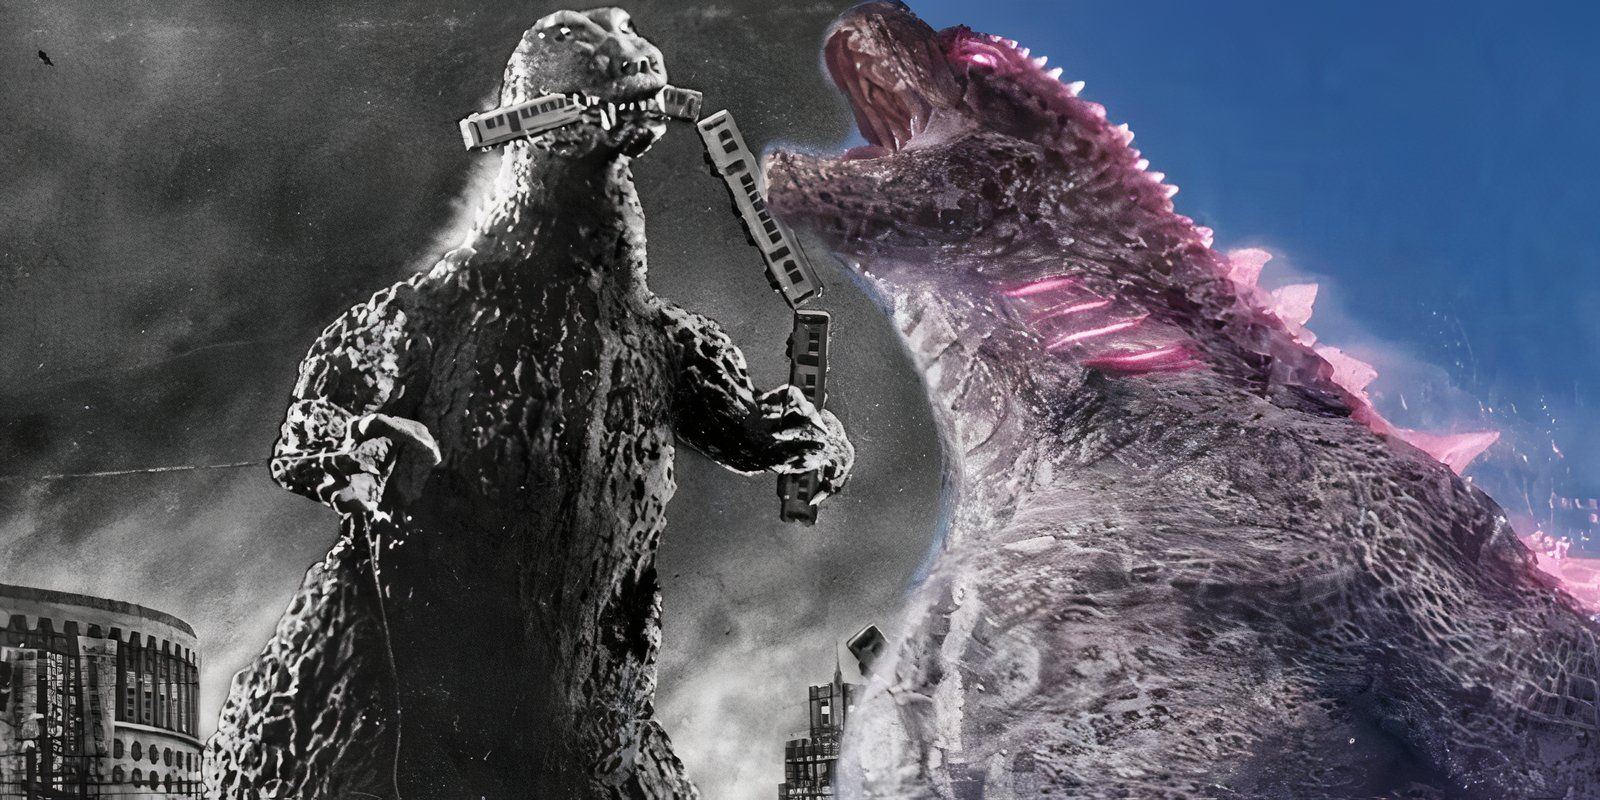 “Just Ruined My Credibility”: Godzilla 1954 Fan Film Recreation Completely Tricks VFX Artists